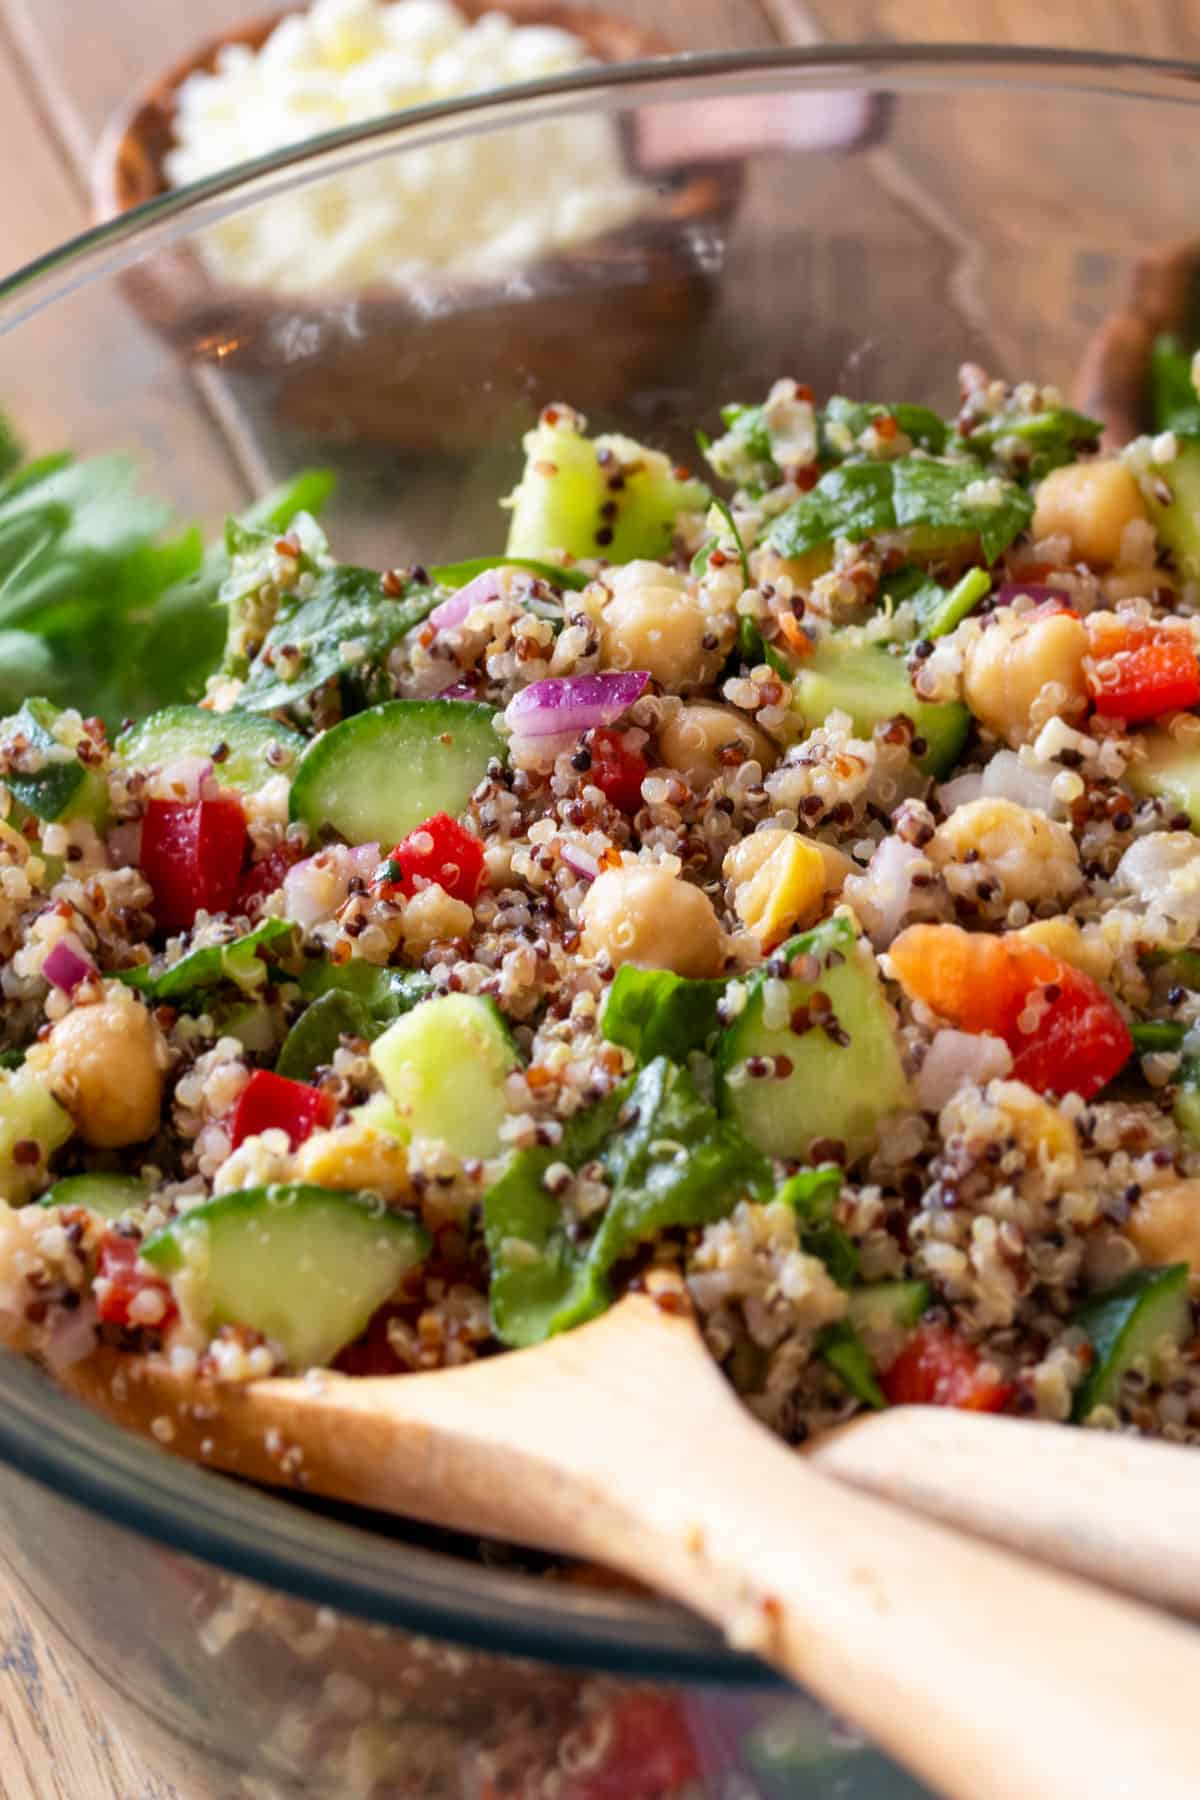 Closeup of quinoa and chickpea salad with fresh vegetables in a bowl with wooden spoons.